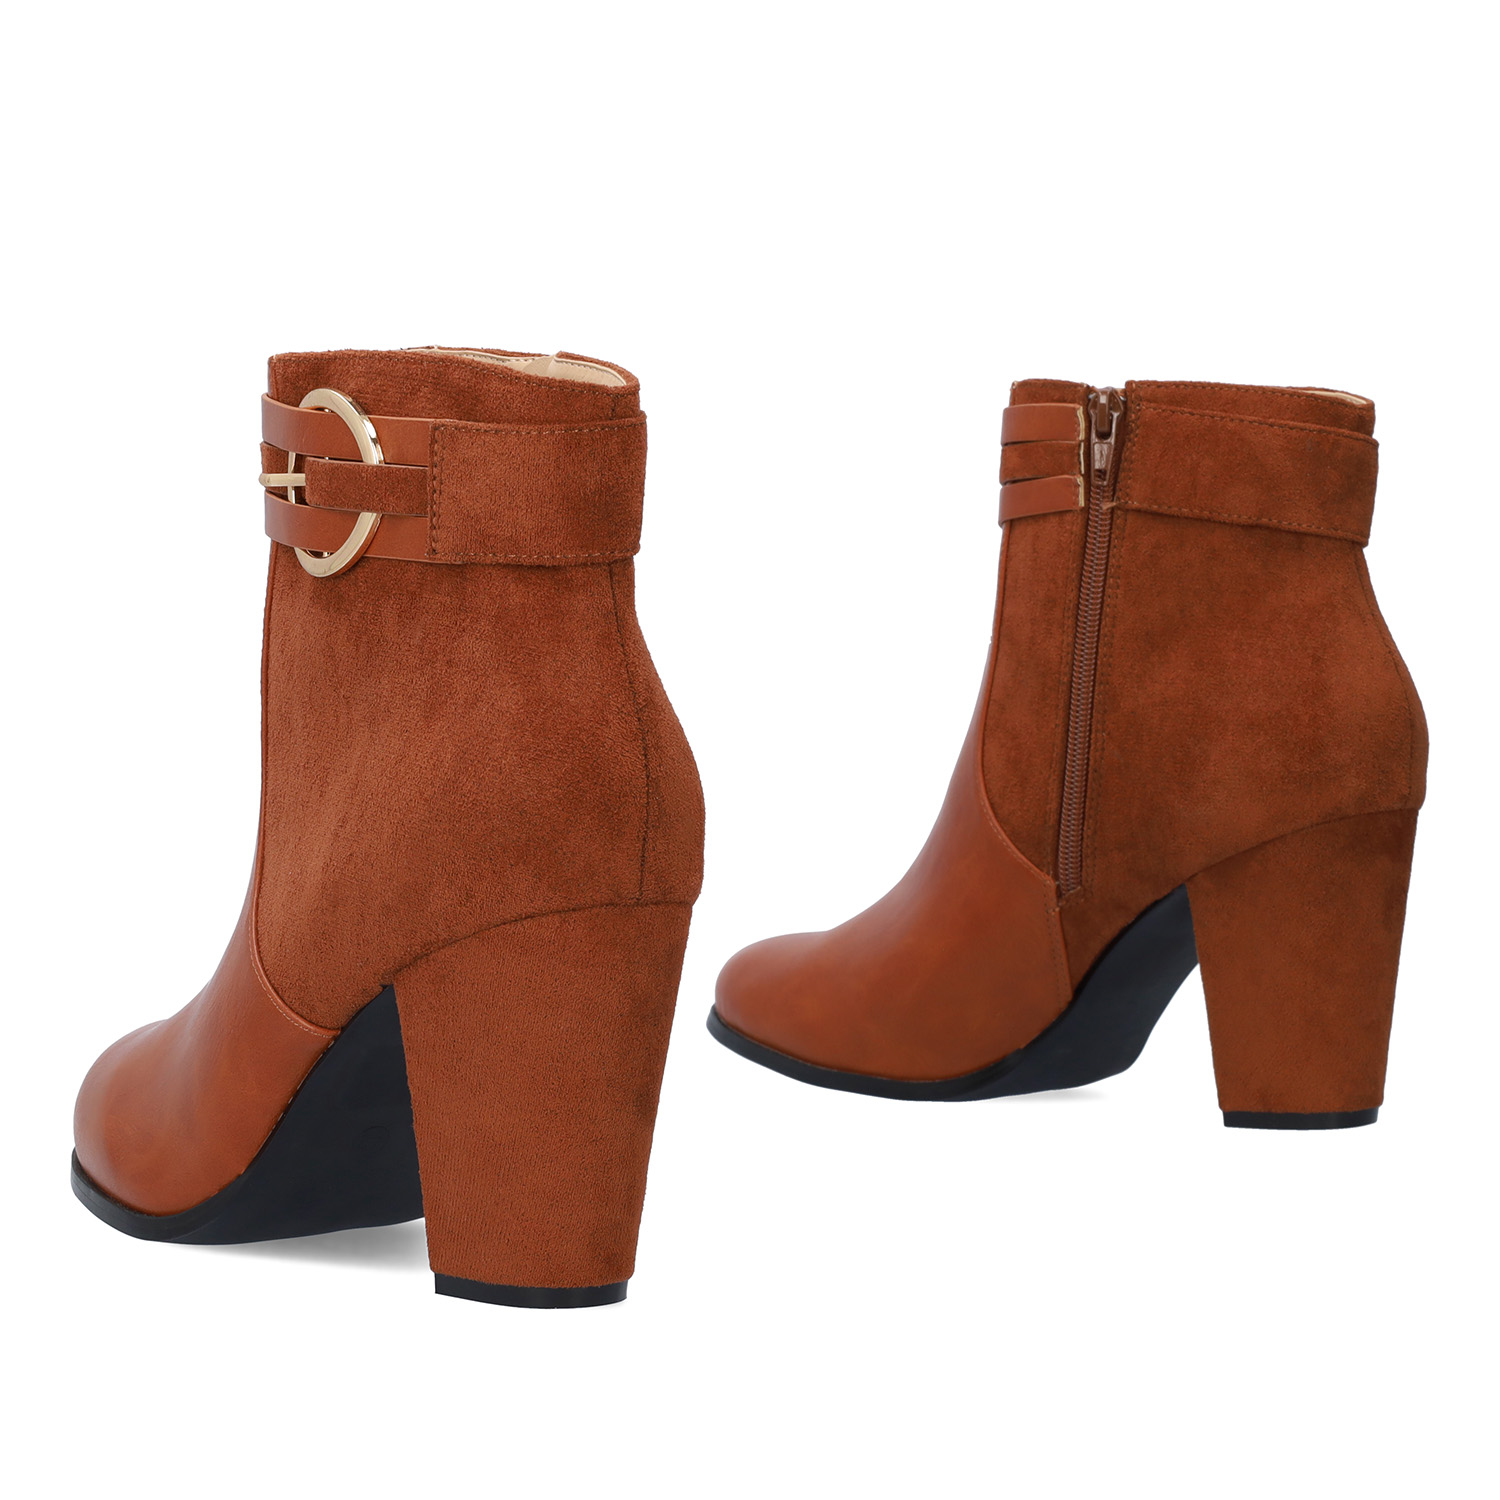 High heeled combined brown colour bootie. 